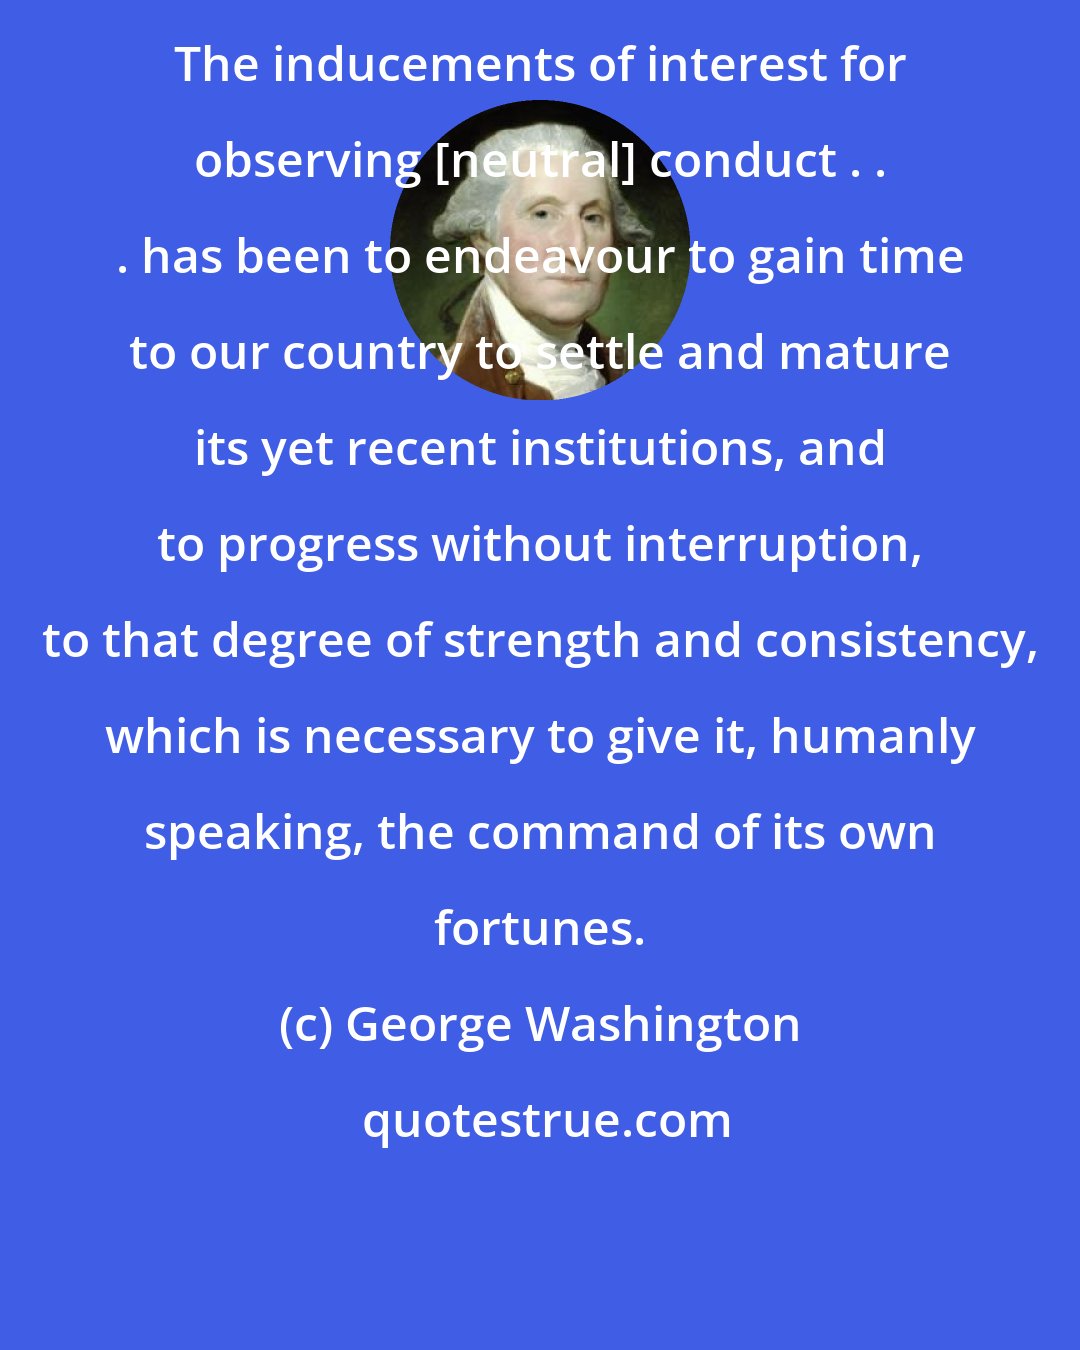 George Washington: The inducements of interest for observing [neutral] conduct . . . has been to endeavour to gain time to our country to settle and mature its yet recent institutions, and to progress without interruption, to that degree of strength and consistency, which is necessary to give it, humanly speaking, the command of its own fortunes.